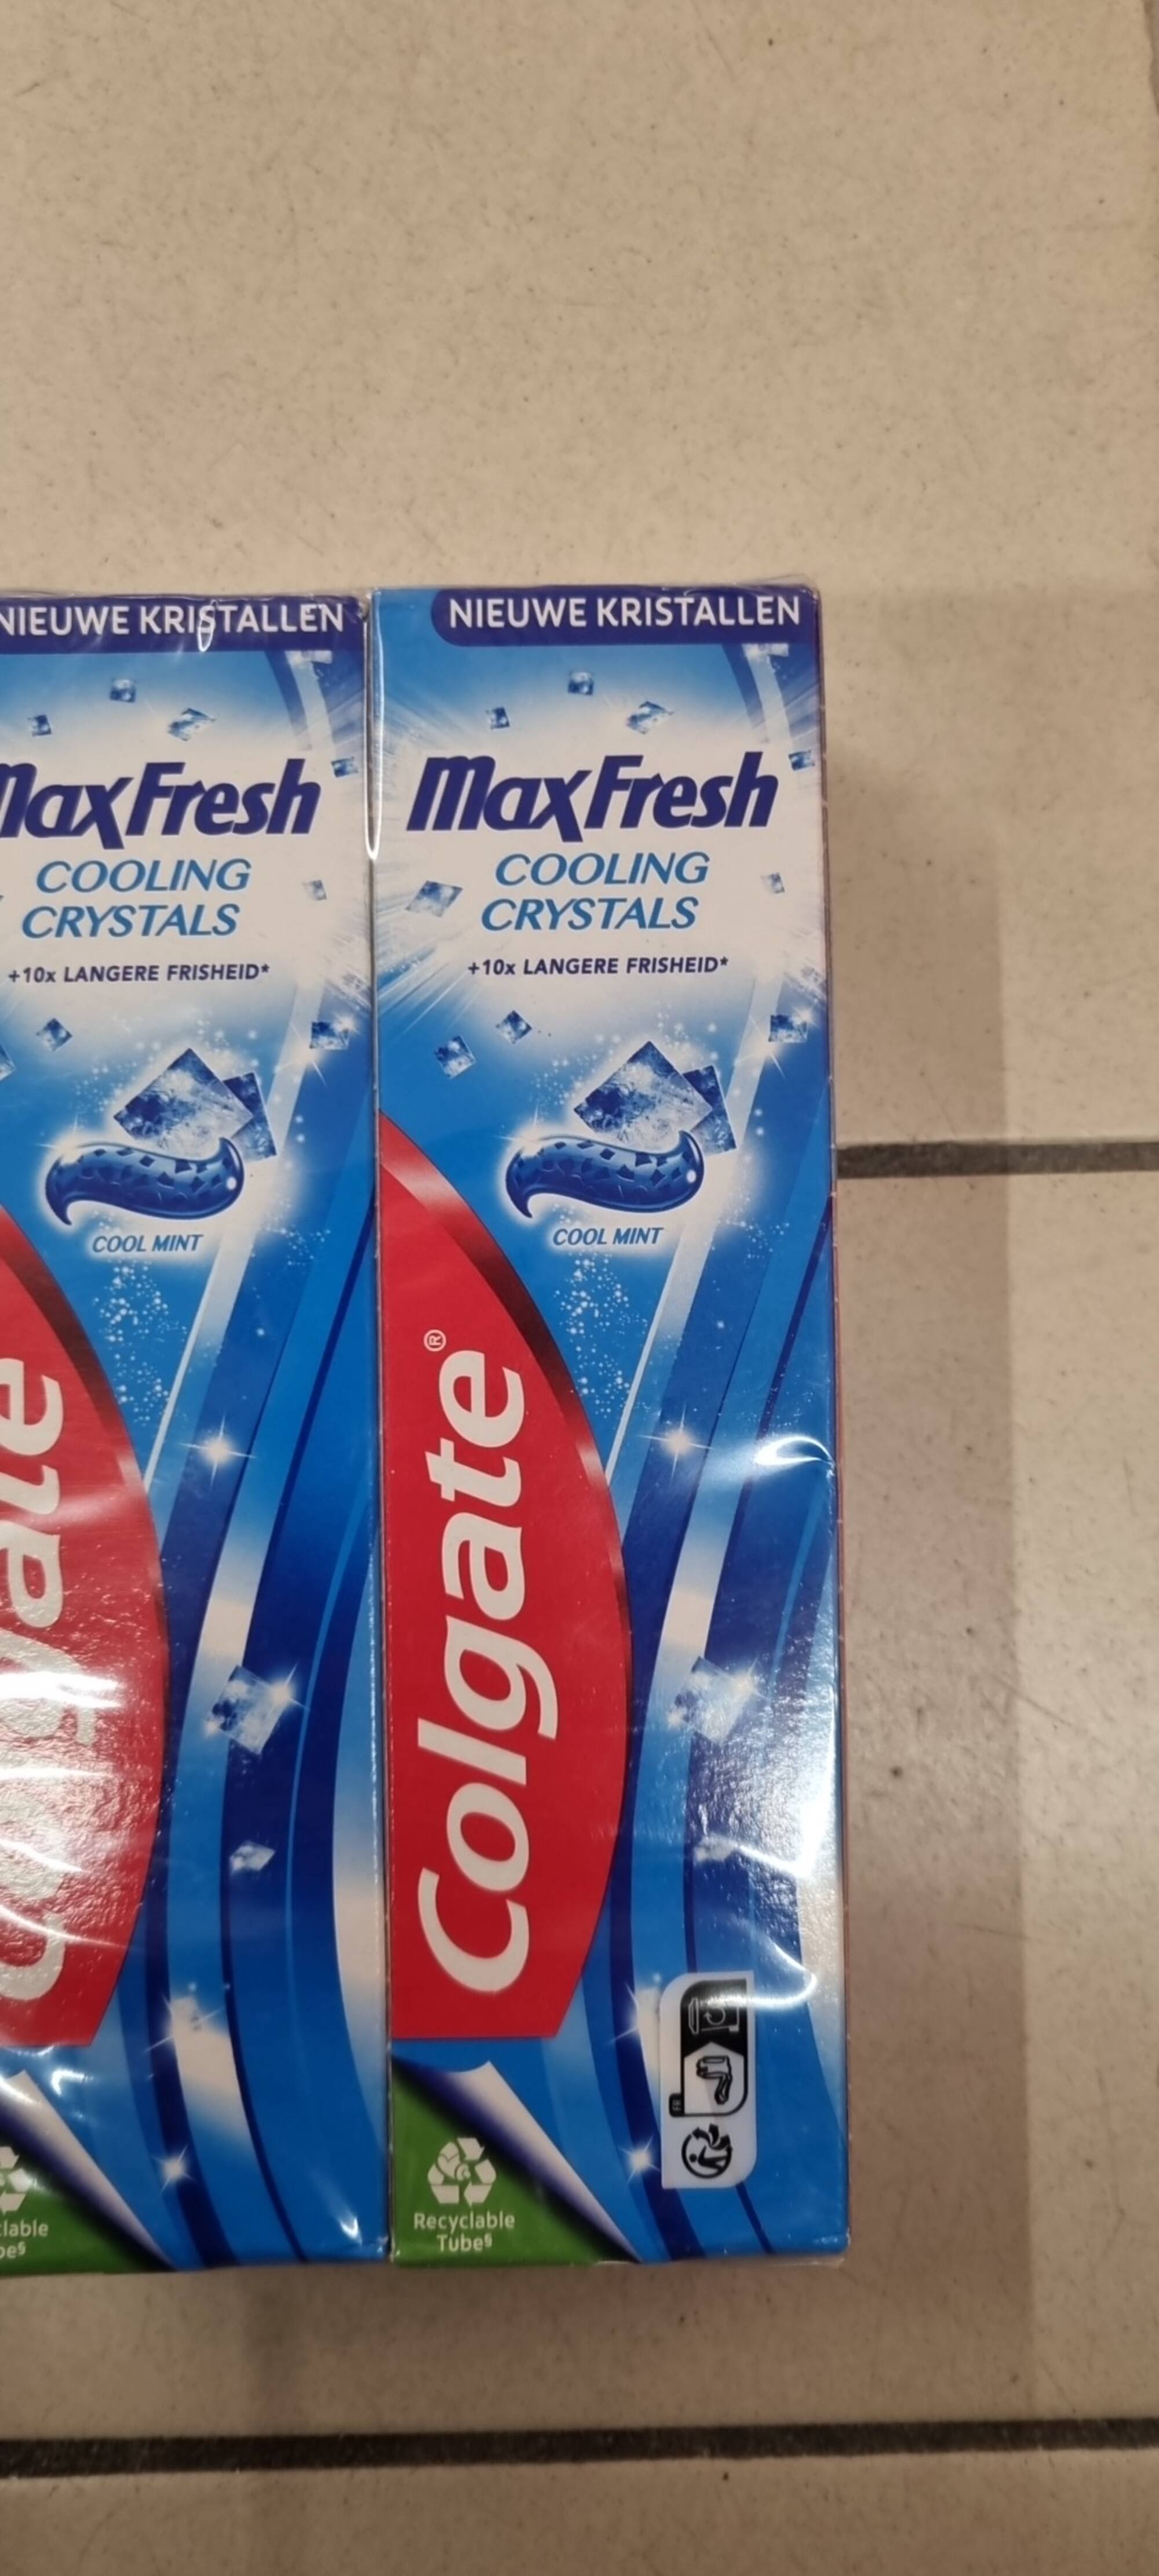 COLGATE - Max fresh cooling crystals - Dentifrice